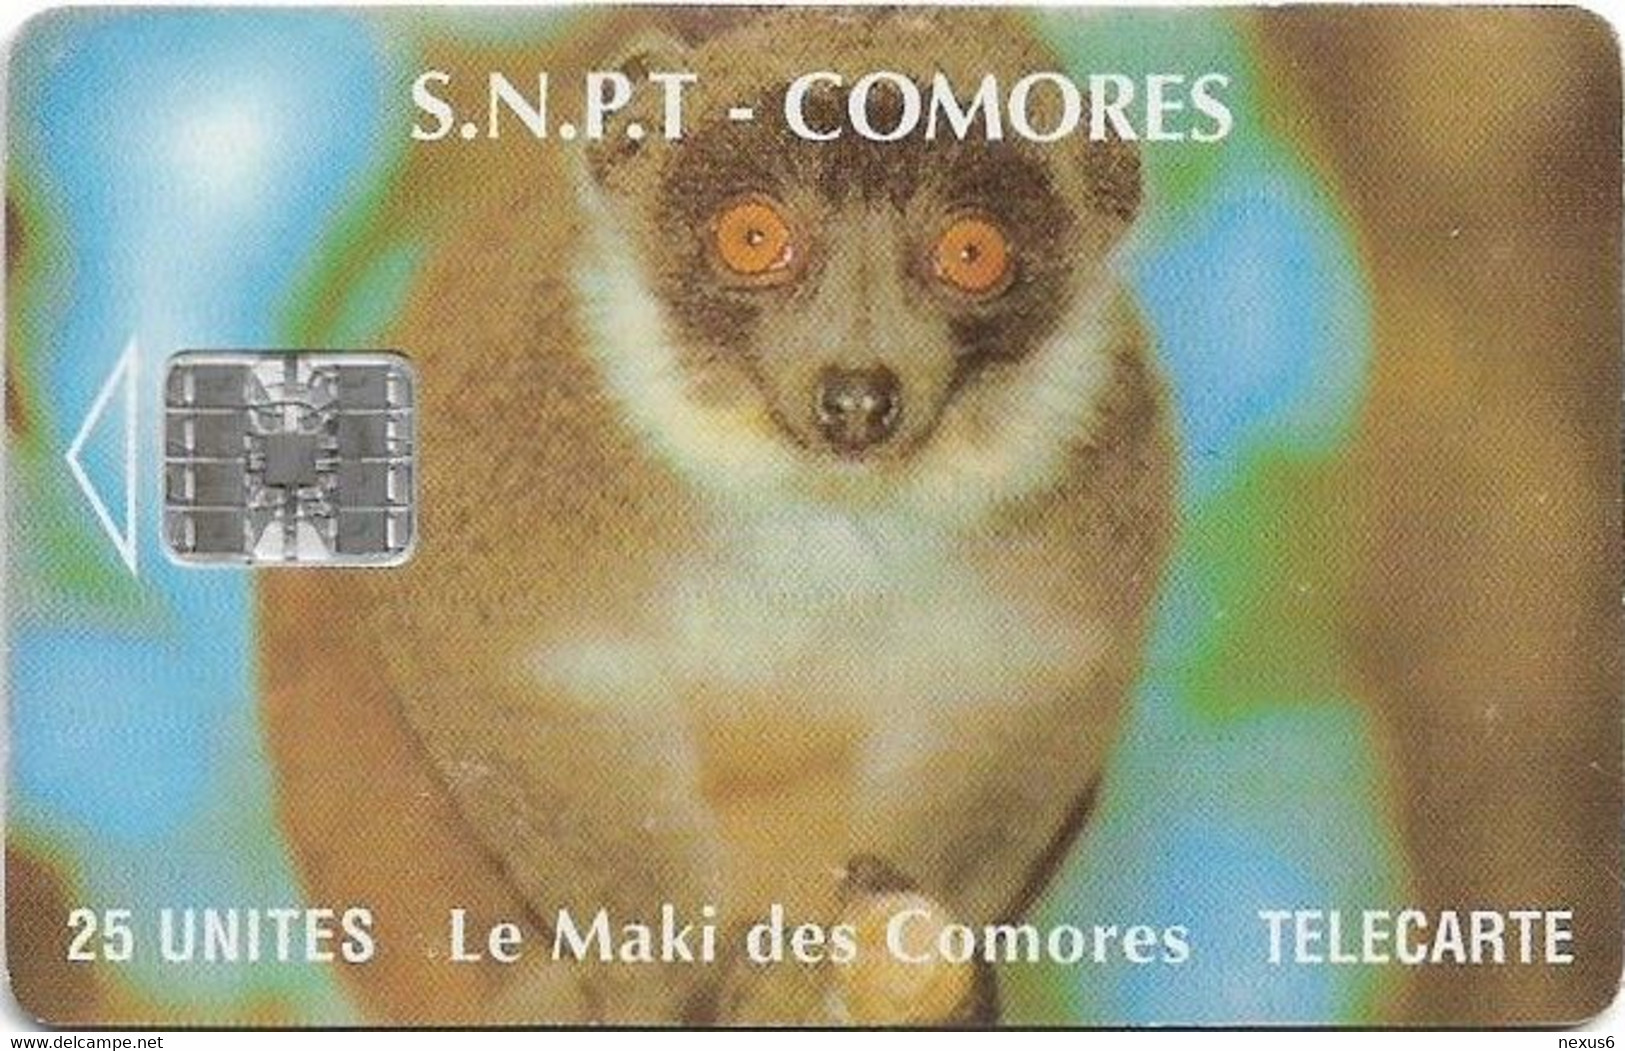 Comoros - S.N.P.T. - Maki, Without Moreno Up Right, Without Cn., SC7, 1994, 25Units, Used - Comores